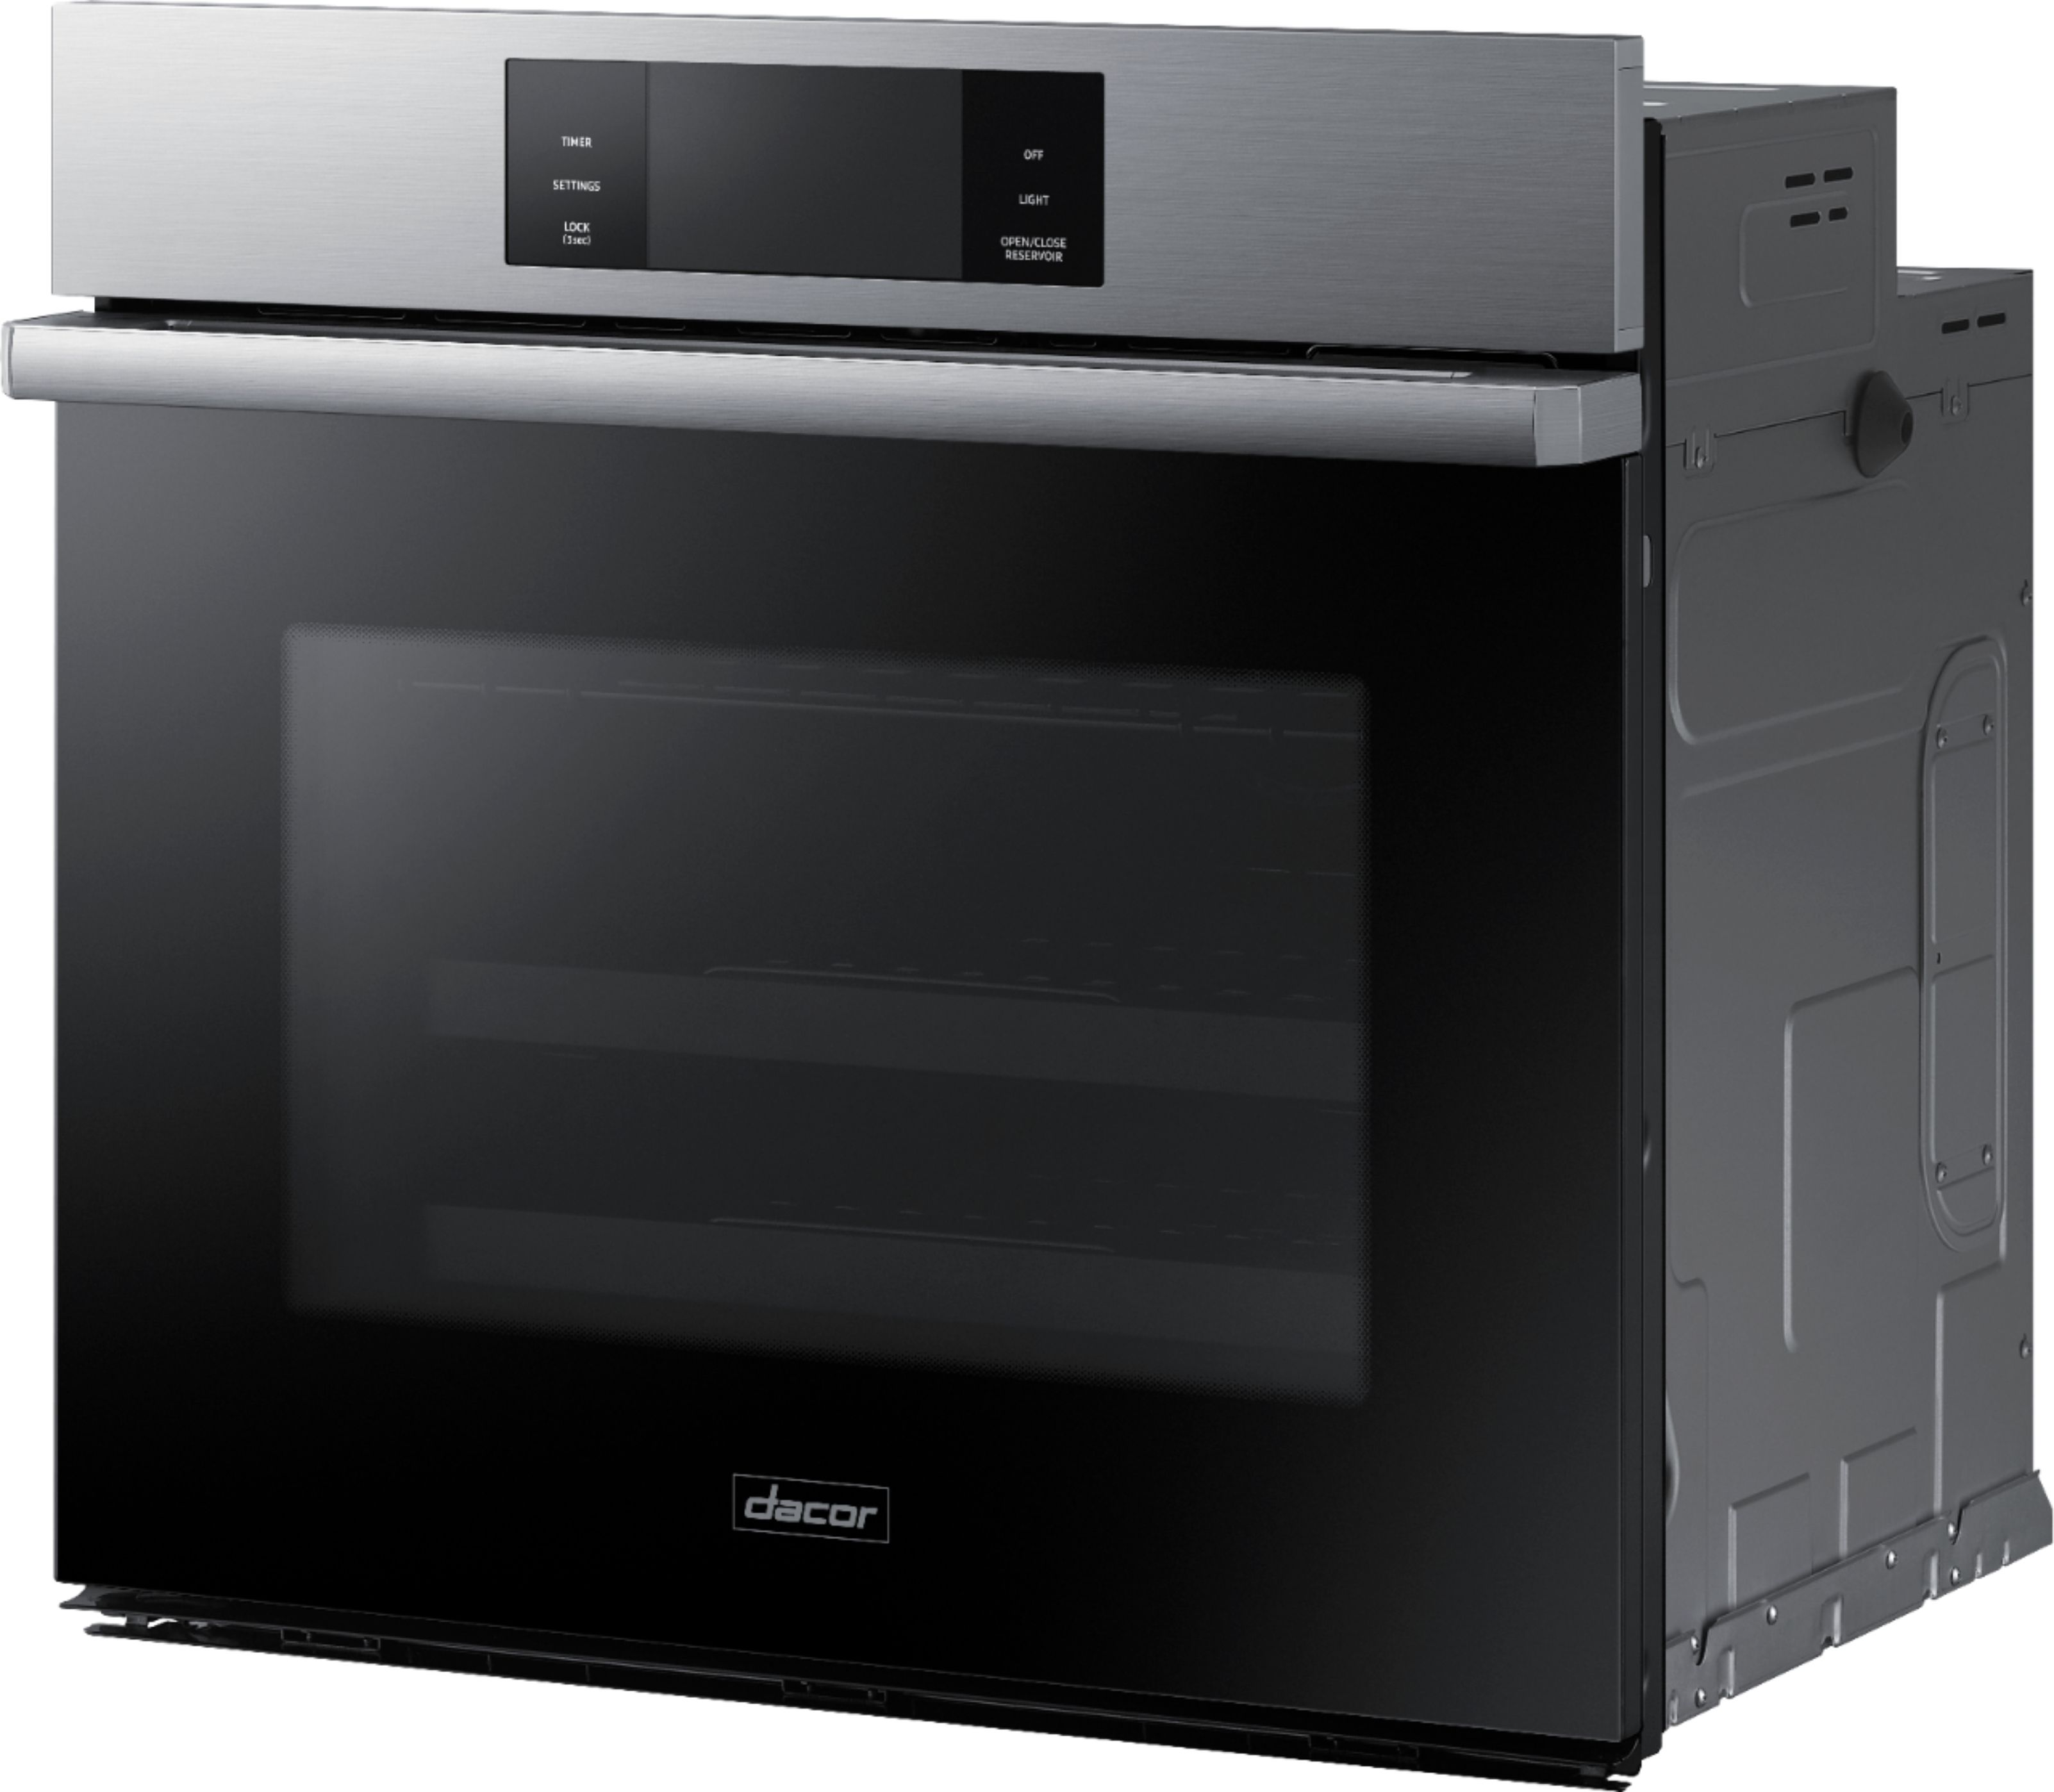 Angle View: Bertazzoni - Master Series 29.8" Built-In Single Electric Convection Wall Oven - Stainless steel